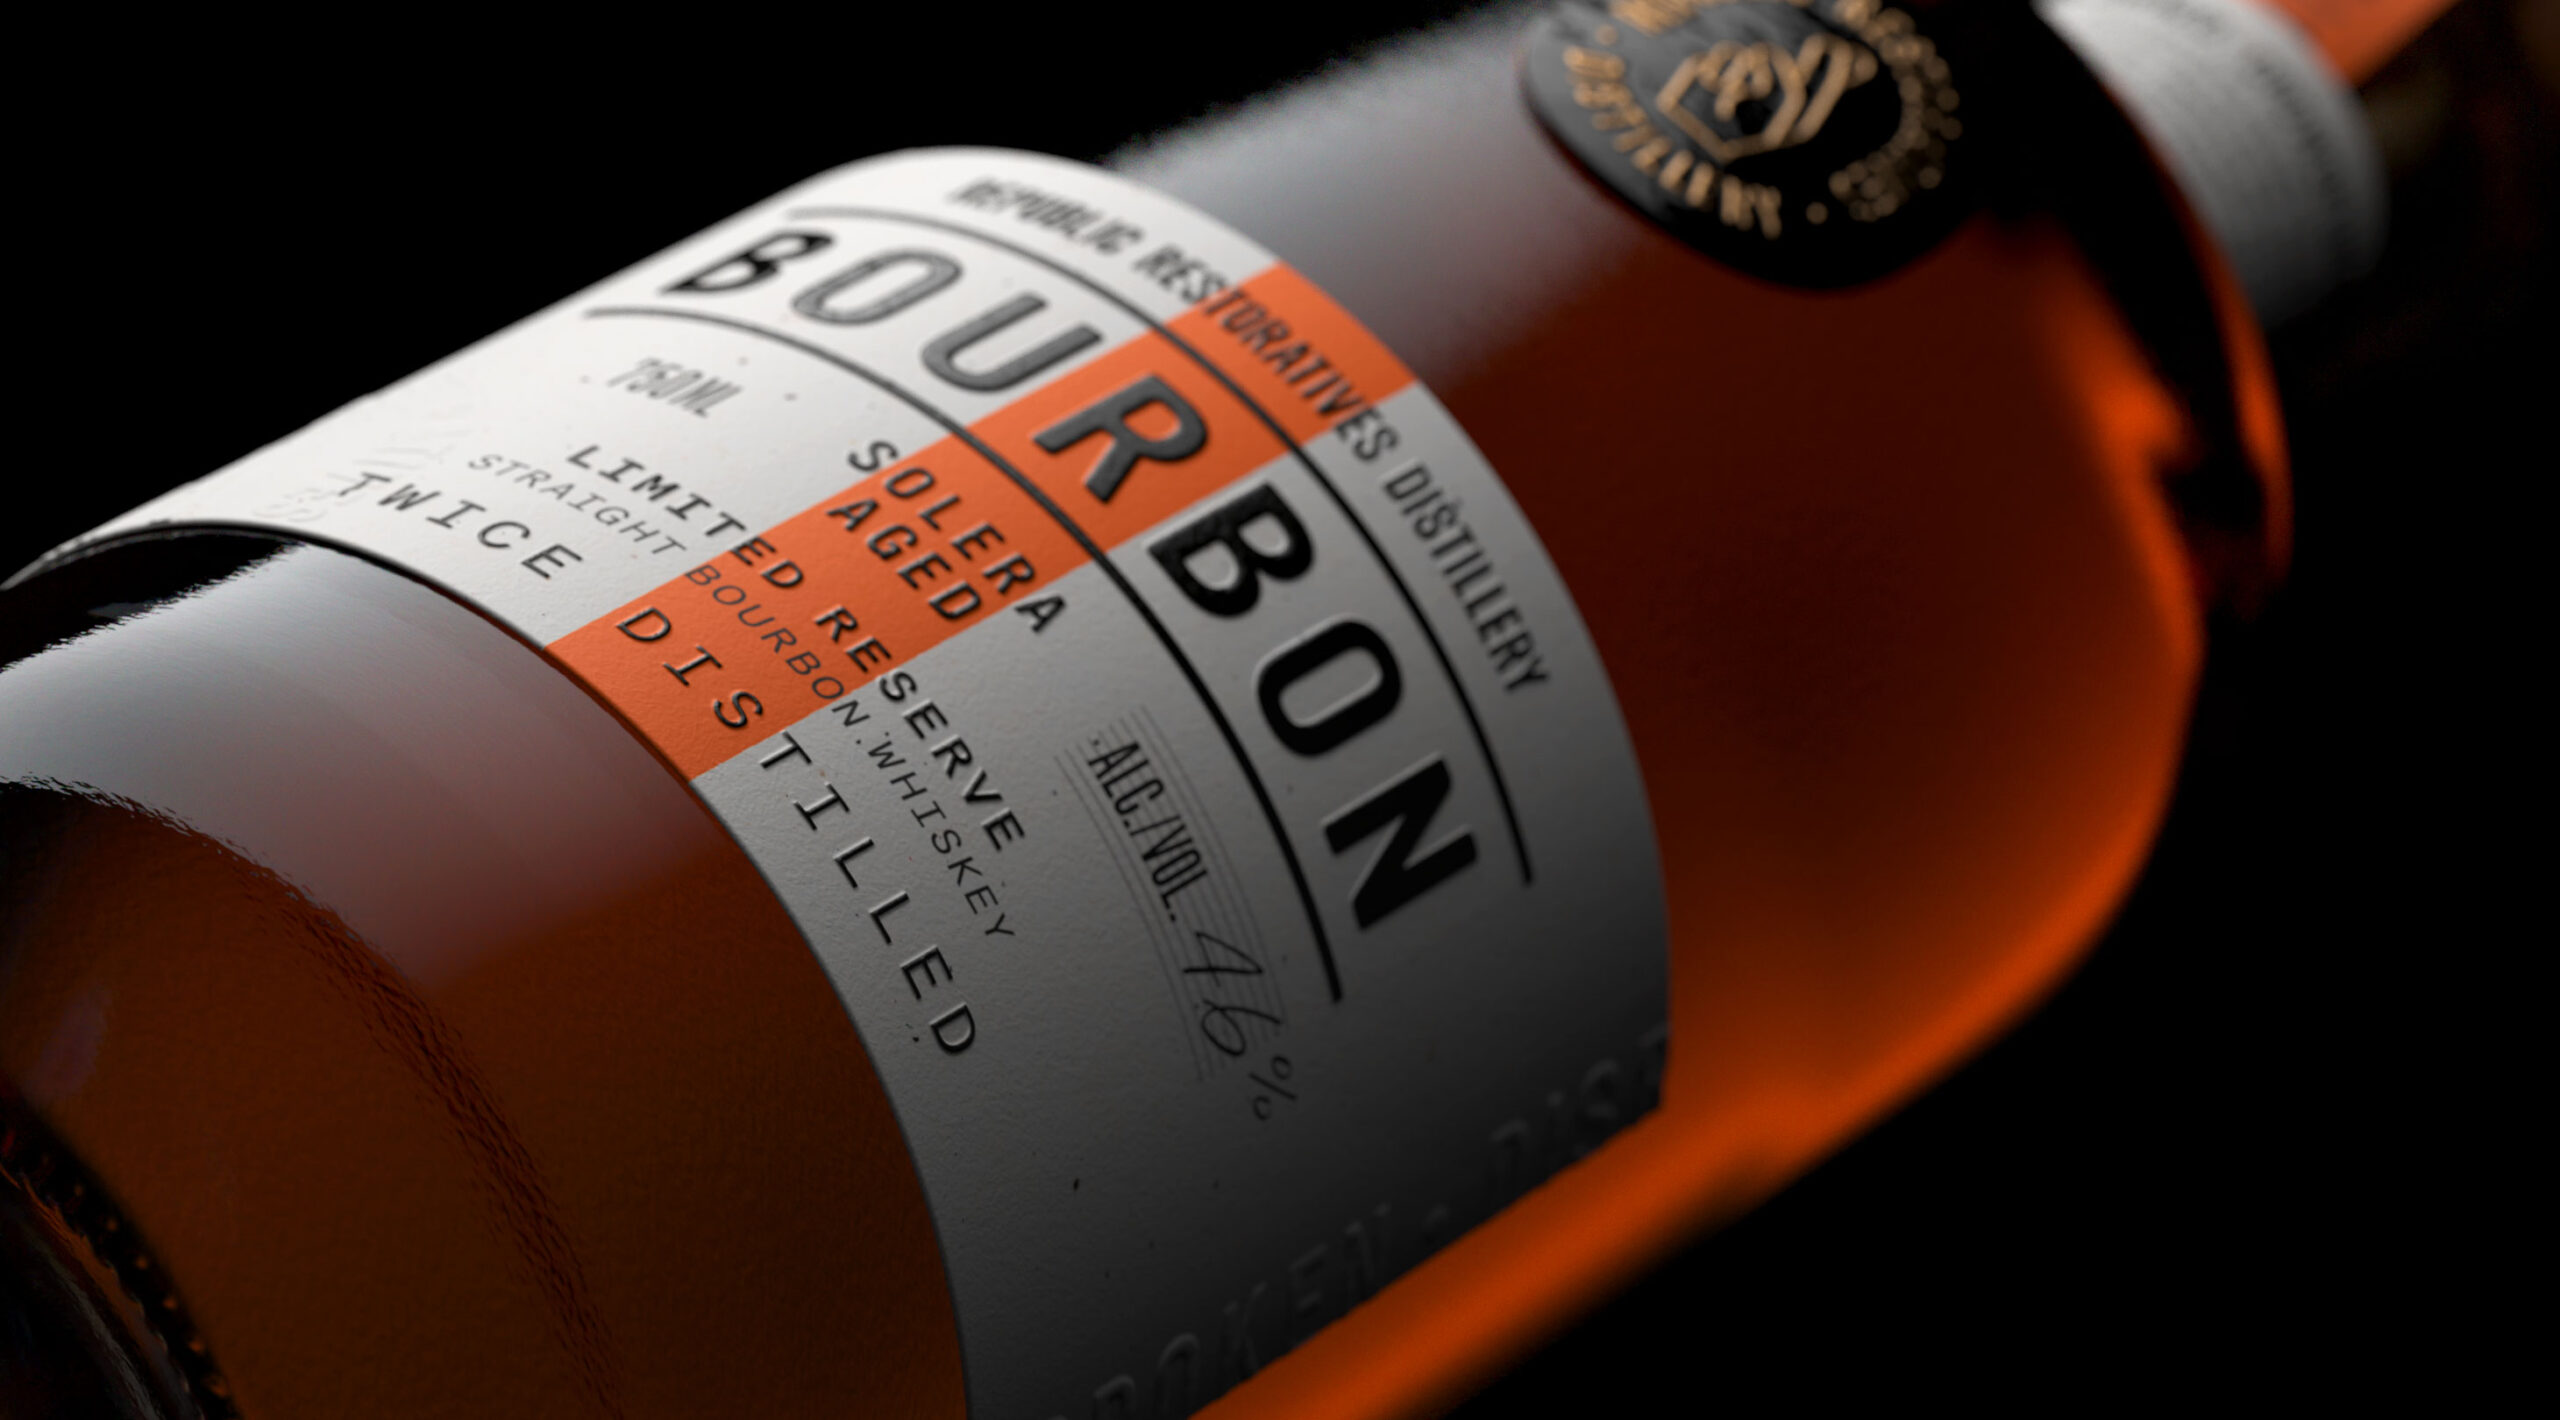 Midday Studio Designs Signature Bourbon Packaging for Women-Owned Republic Restoratives Distillery